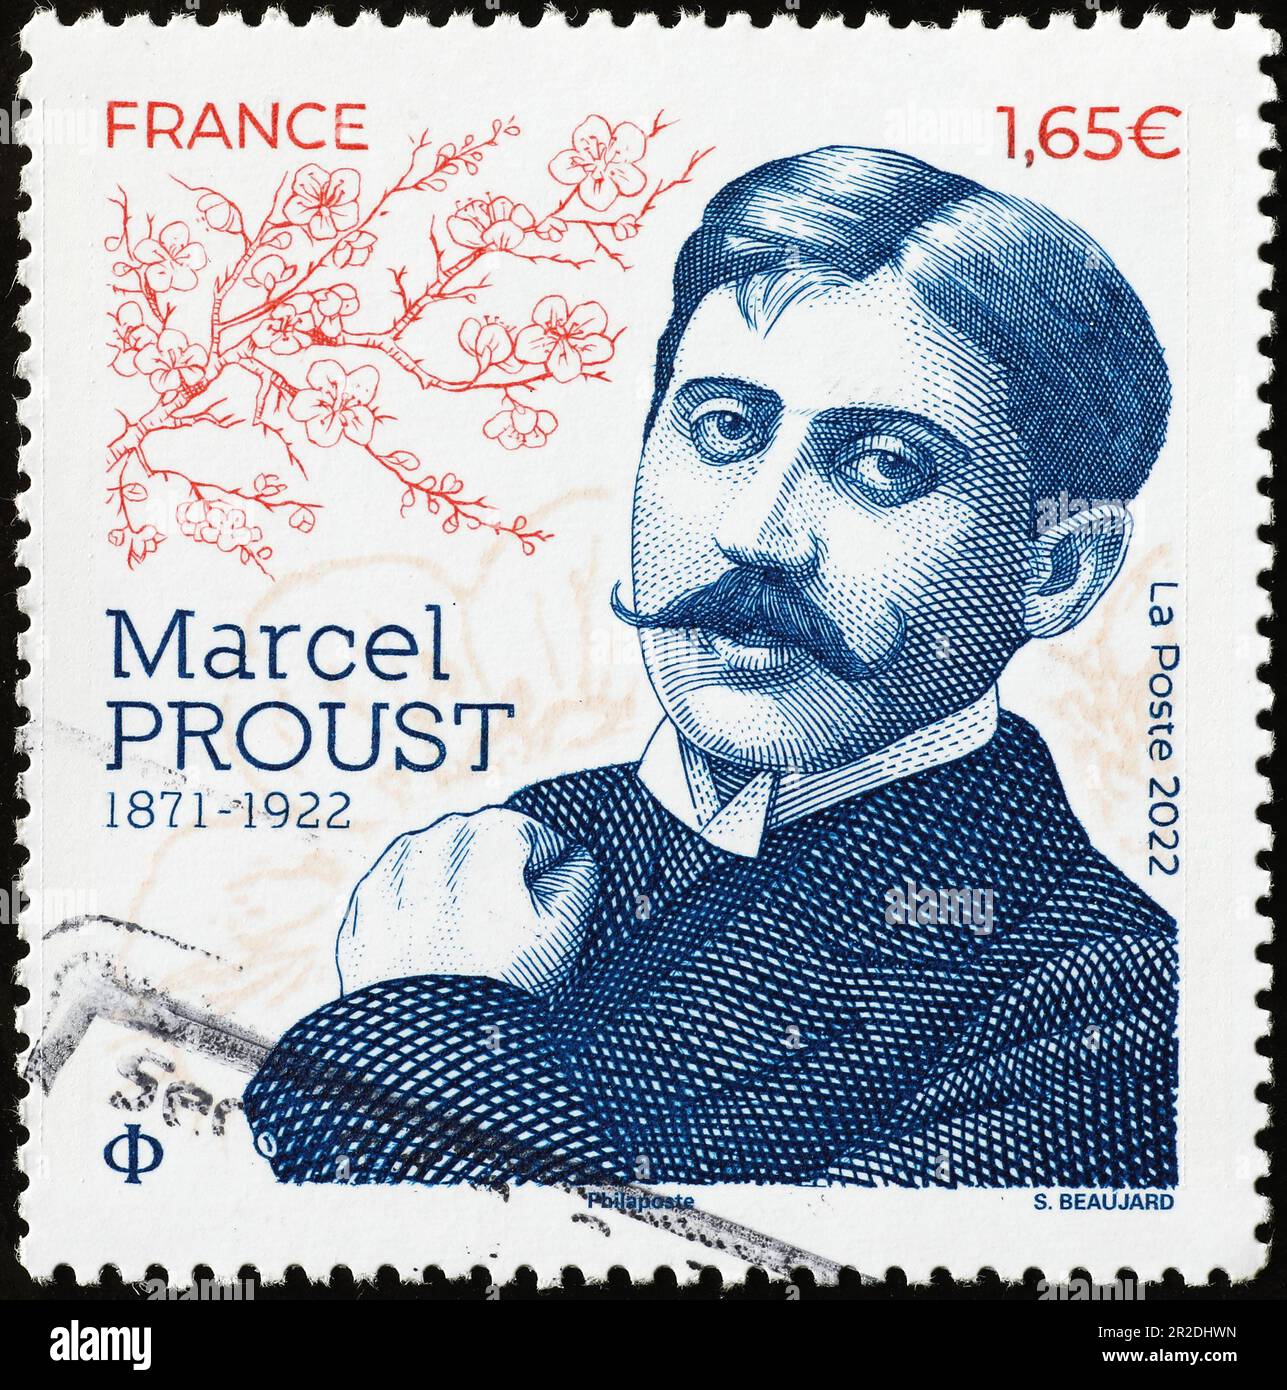 Marcel Proust portrait on french postage stamp Stock Photo